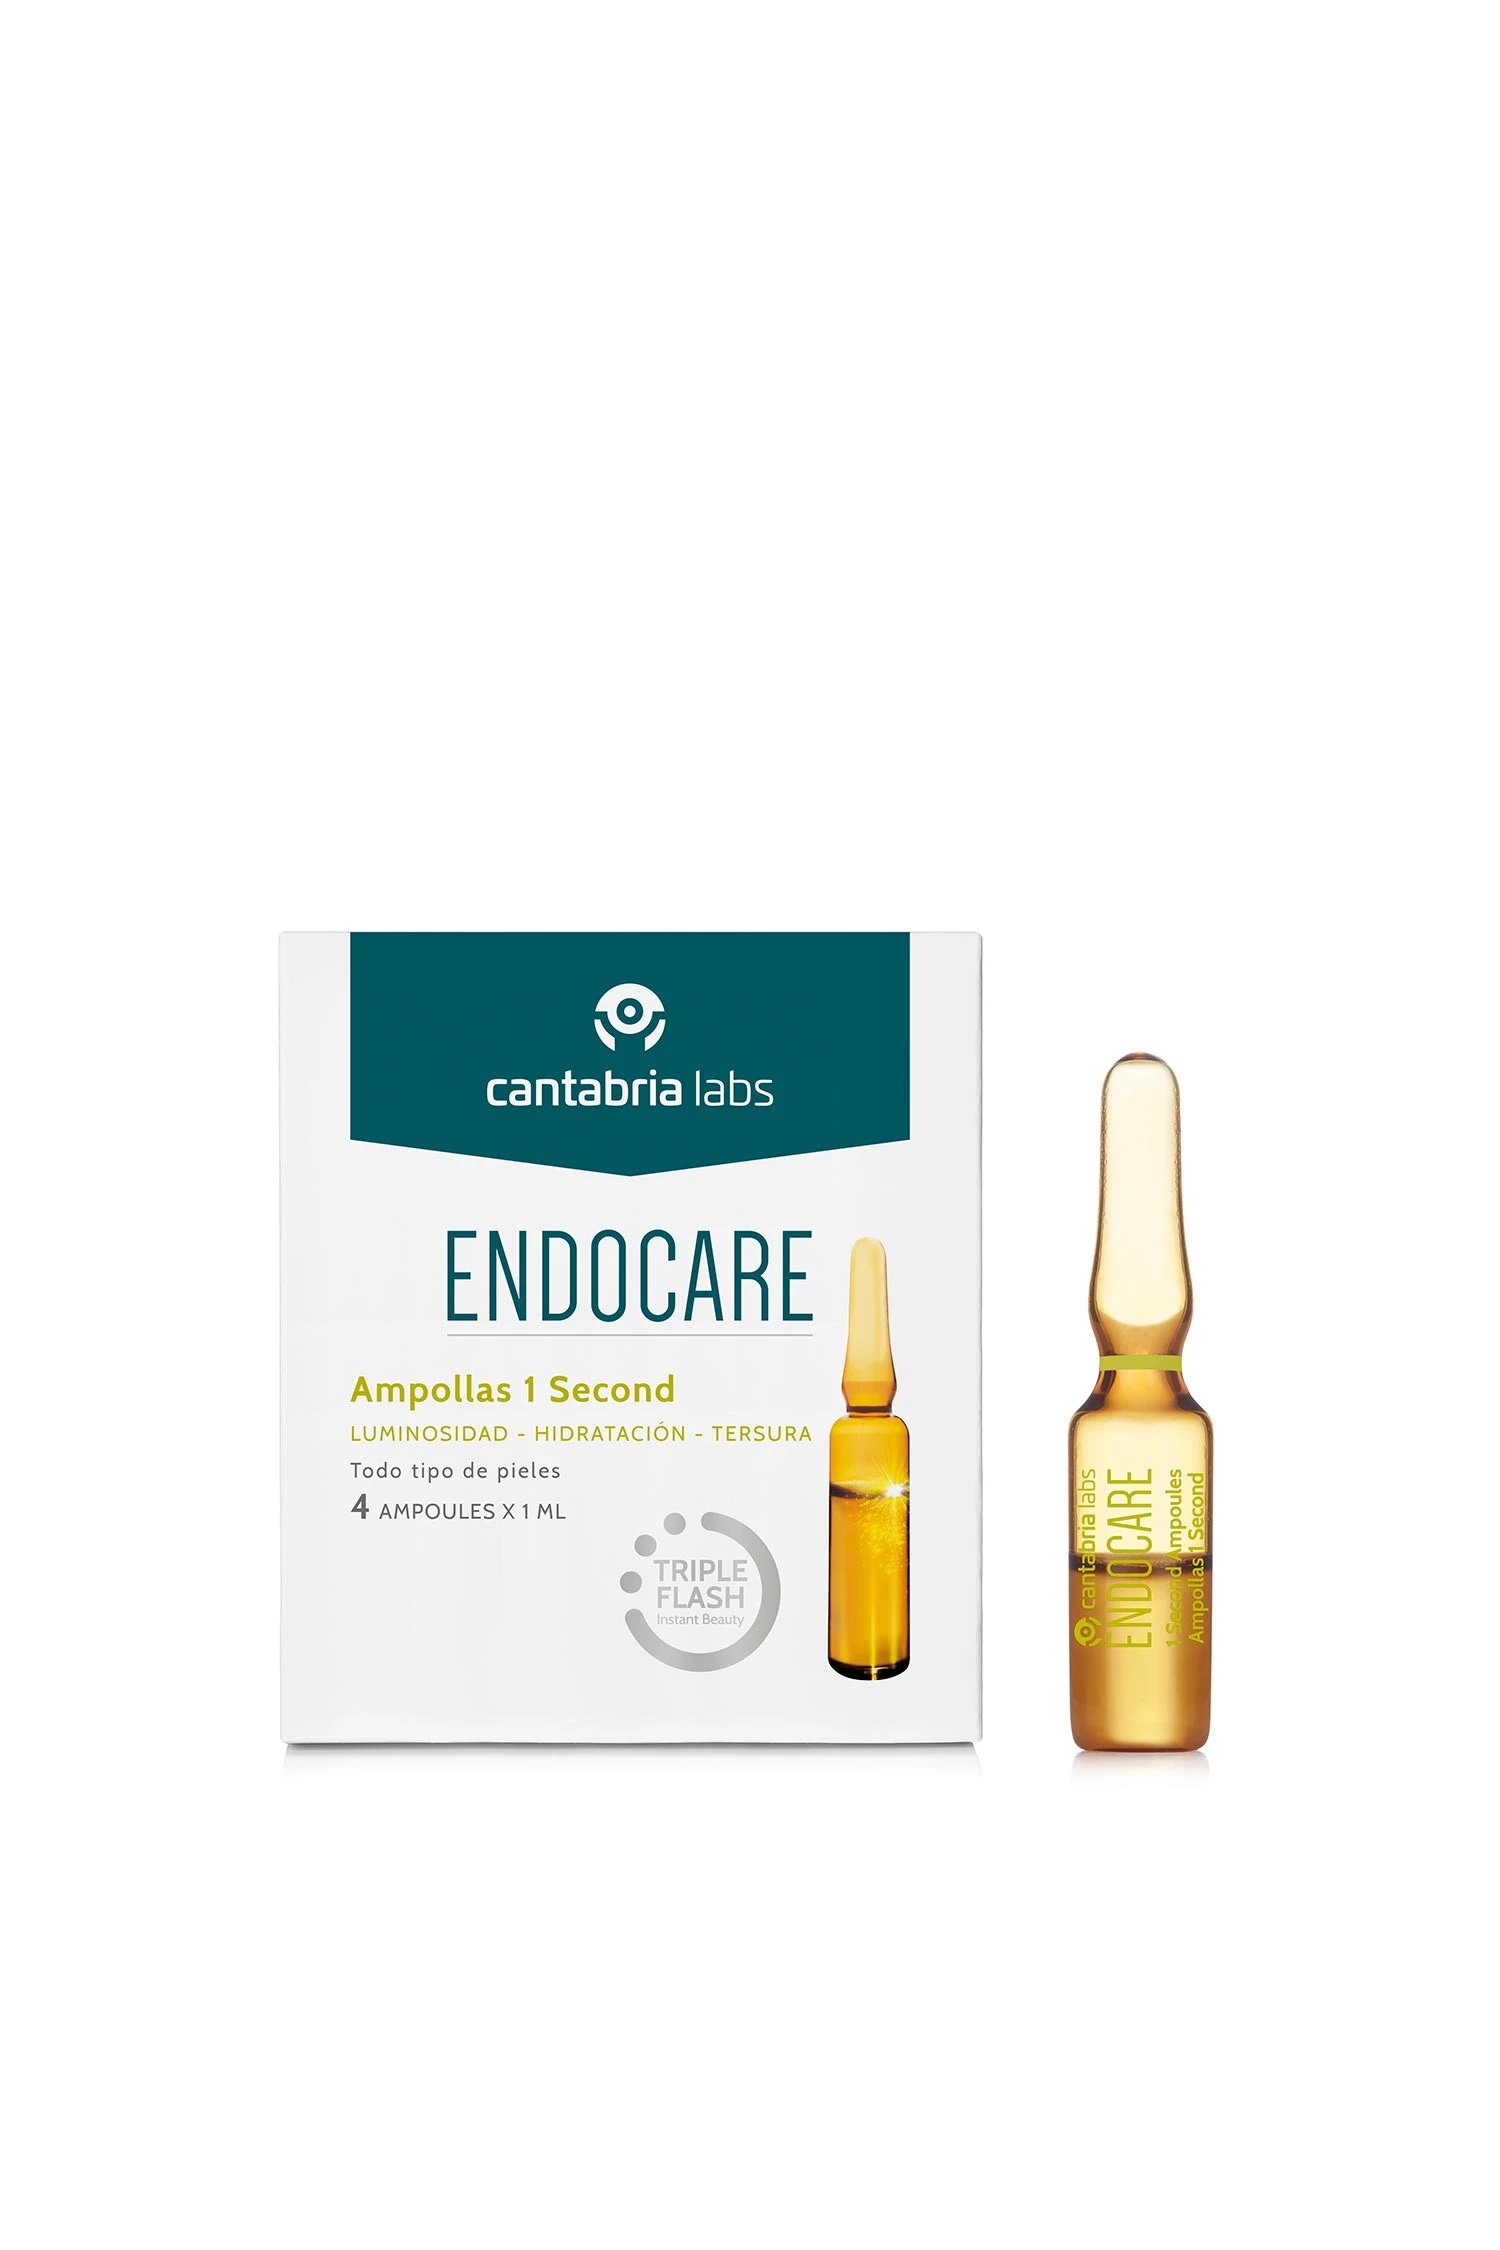 Endocare 1 one second, 4 ampollas